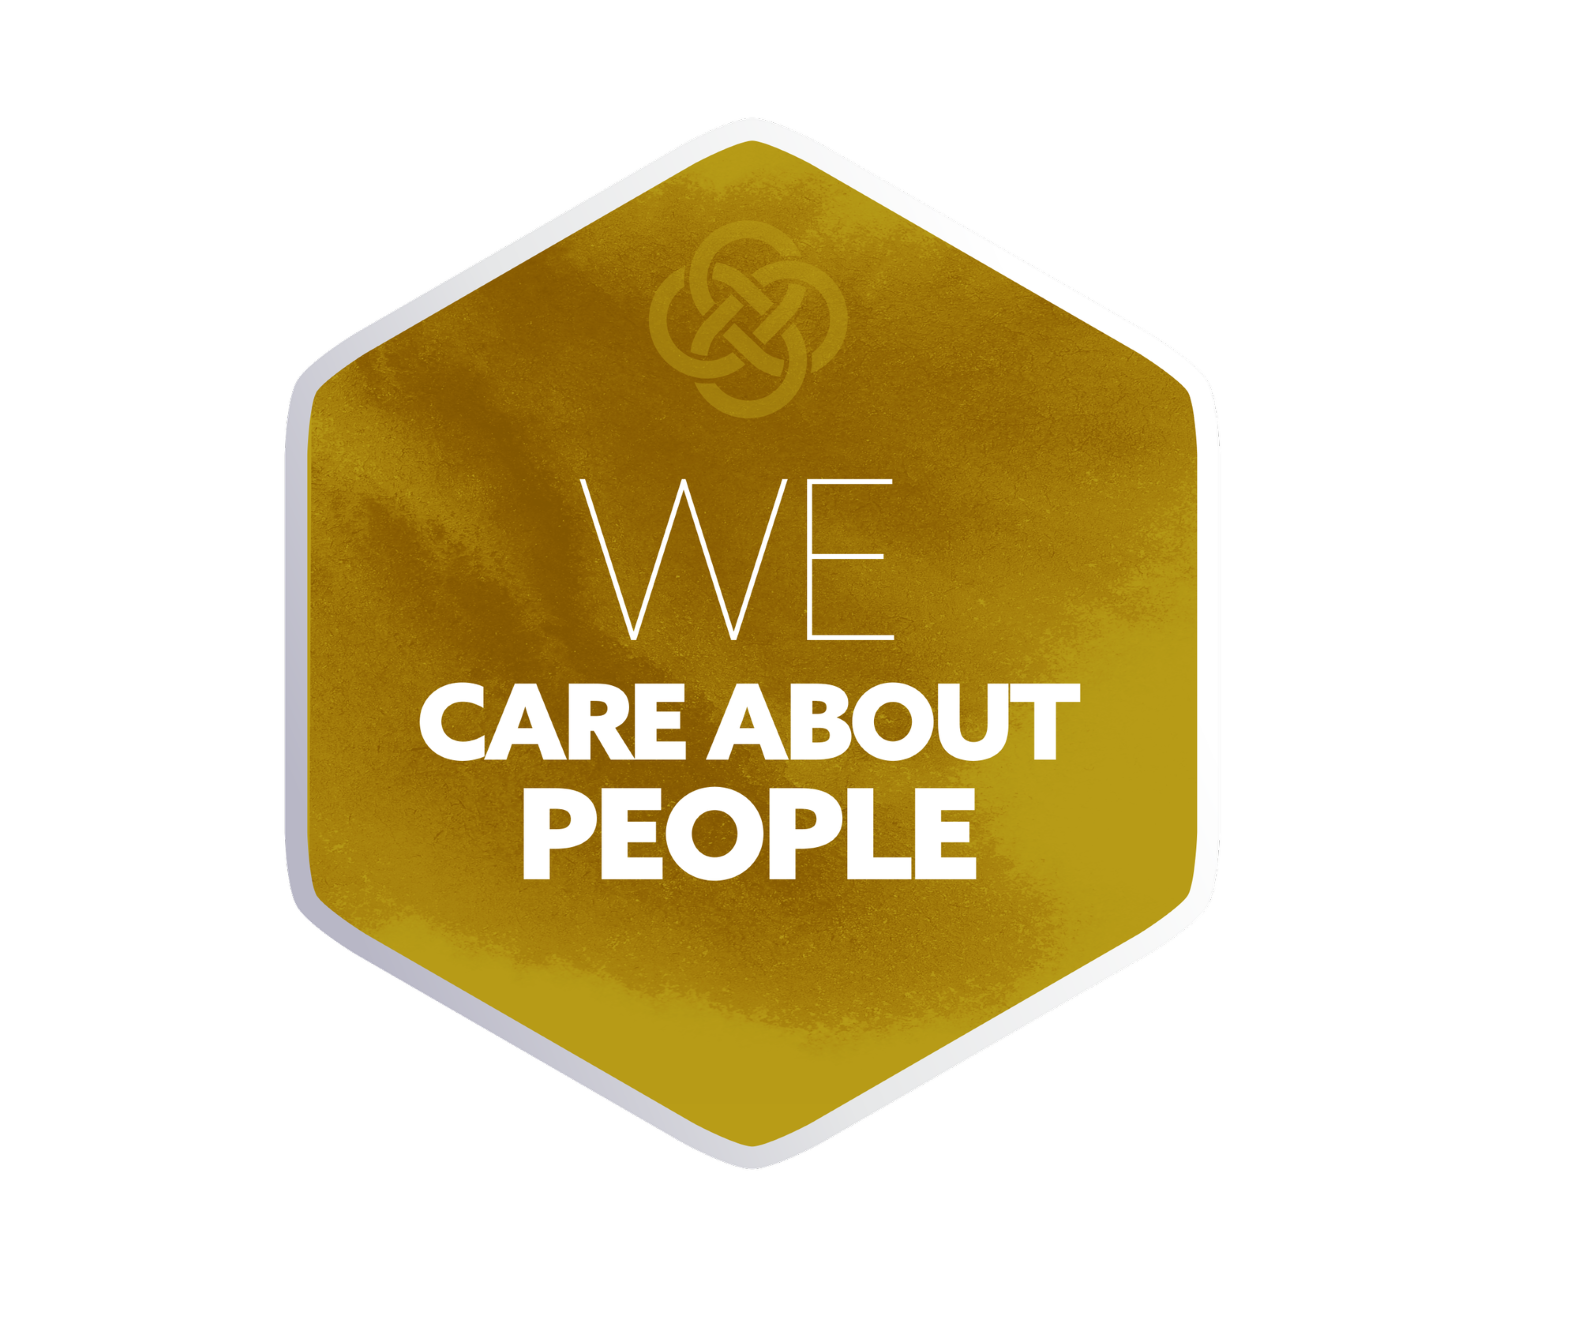 GD value care about people hexagon icon